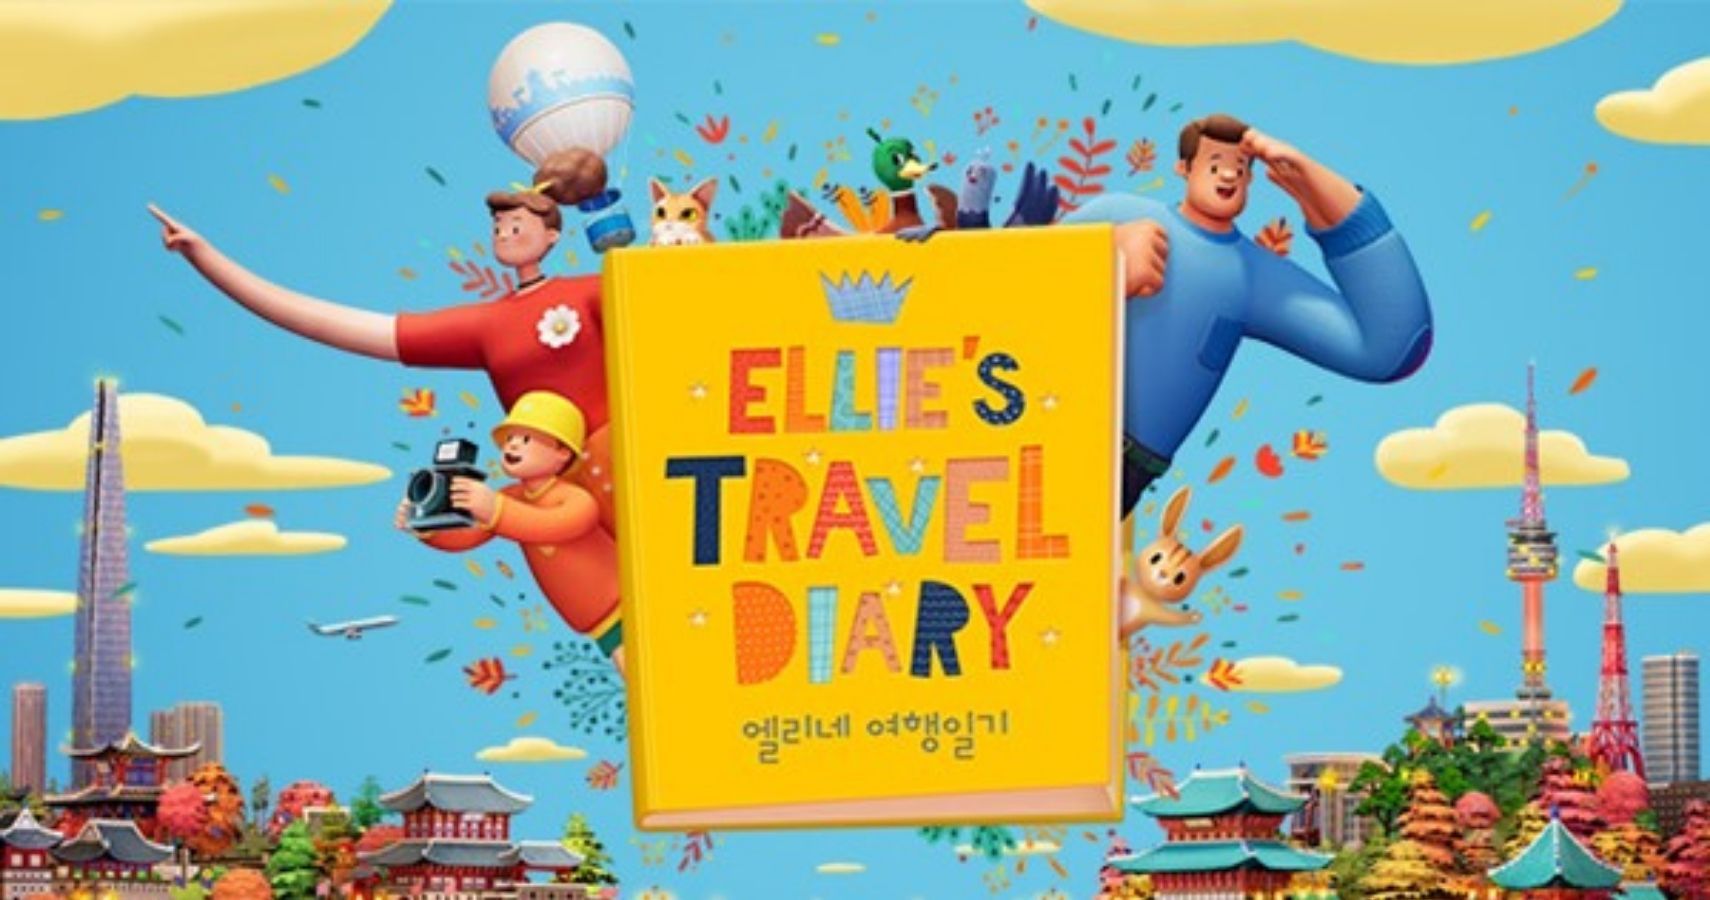 Ellies Travel Diary Is An Immersive And Interactive Sightseeing Tour Through Korea